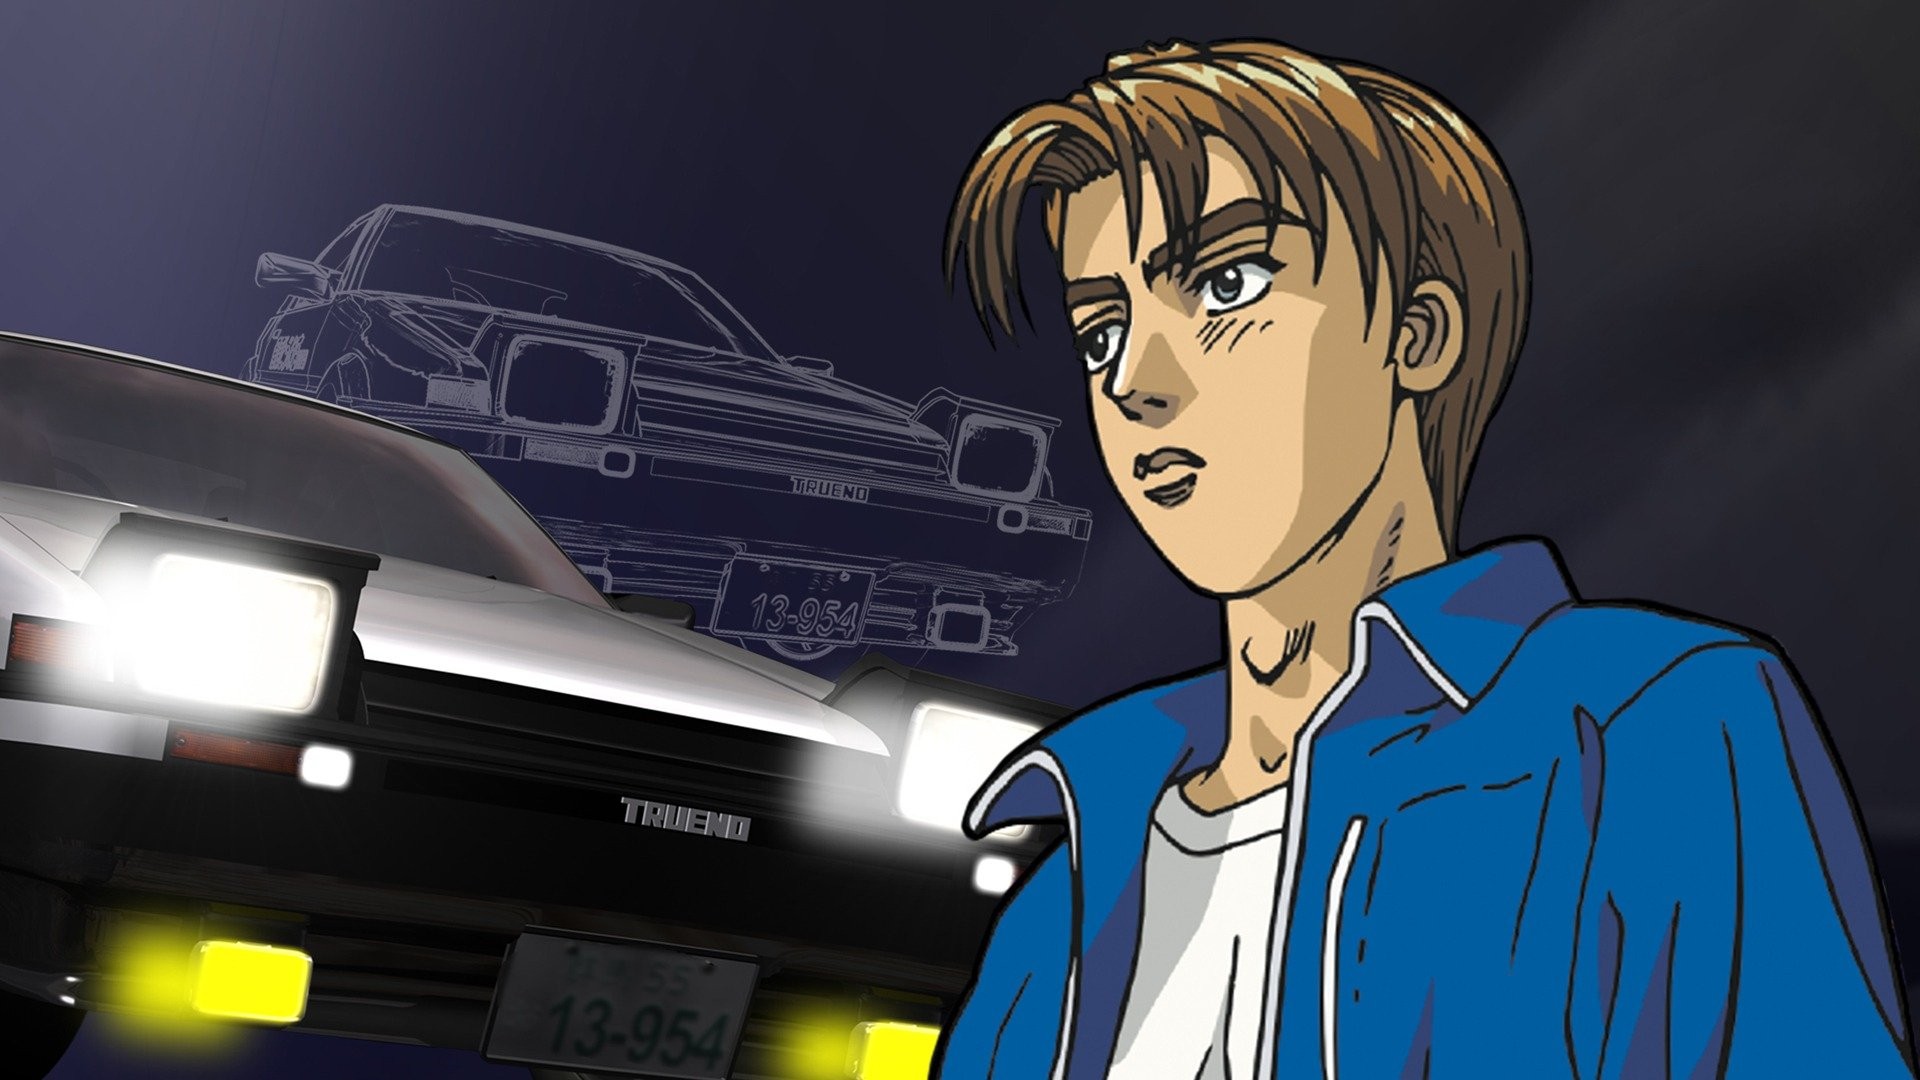 Eurobeat intensifies Initial D sequel anime will stay the course with  dance music soundtrackVid  SoraNews24 Japan News